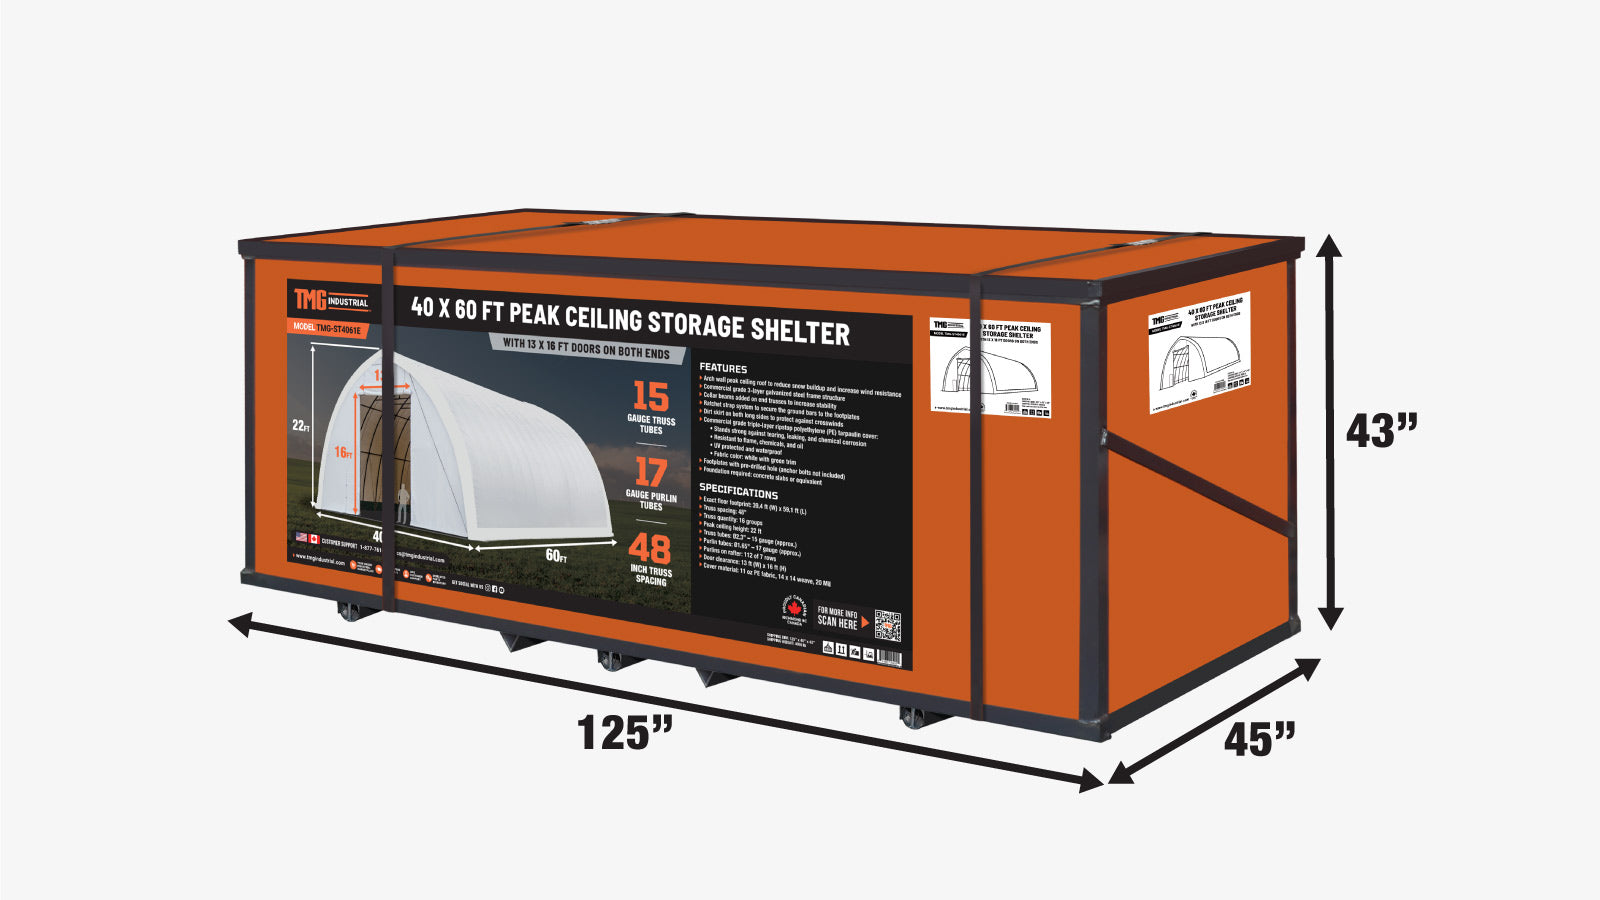 TMG-ST4061E 40' x 60' Peak Ceiling Storage Shelter, Single Truss, 11oz PE Cover, 13' W x 16' H Wide Open Door on Two End Walls-shipping-info-image